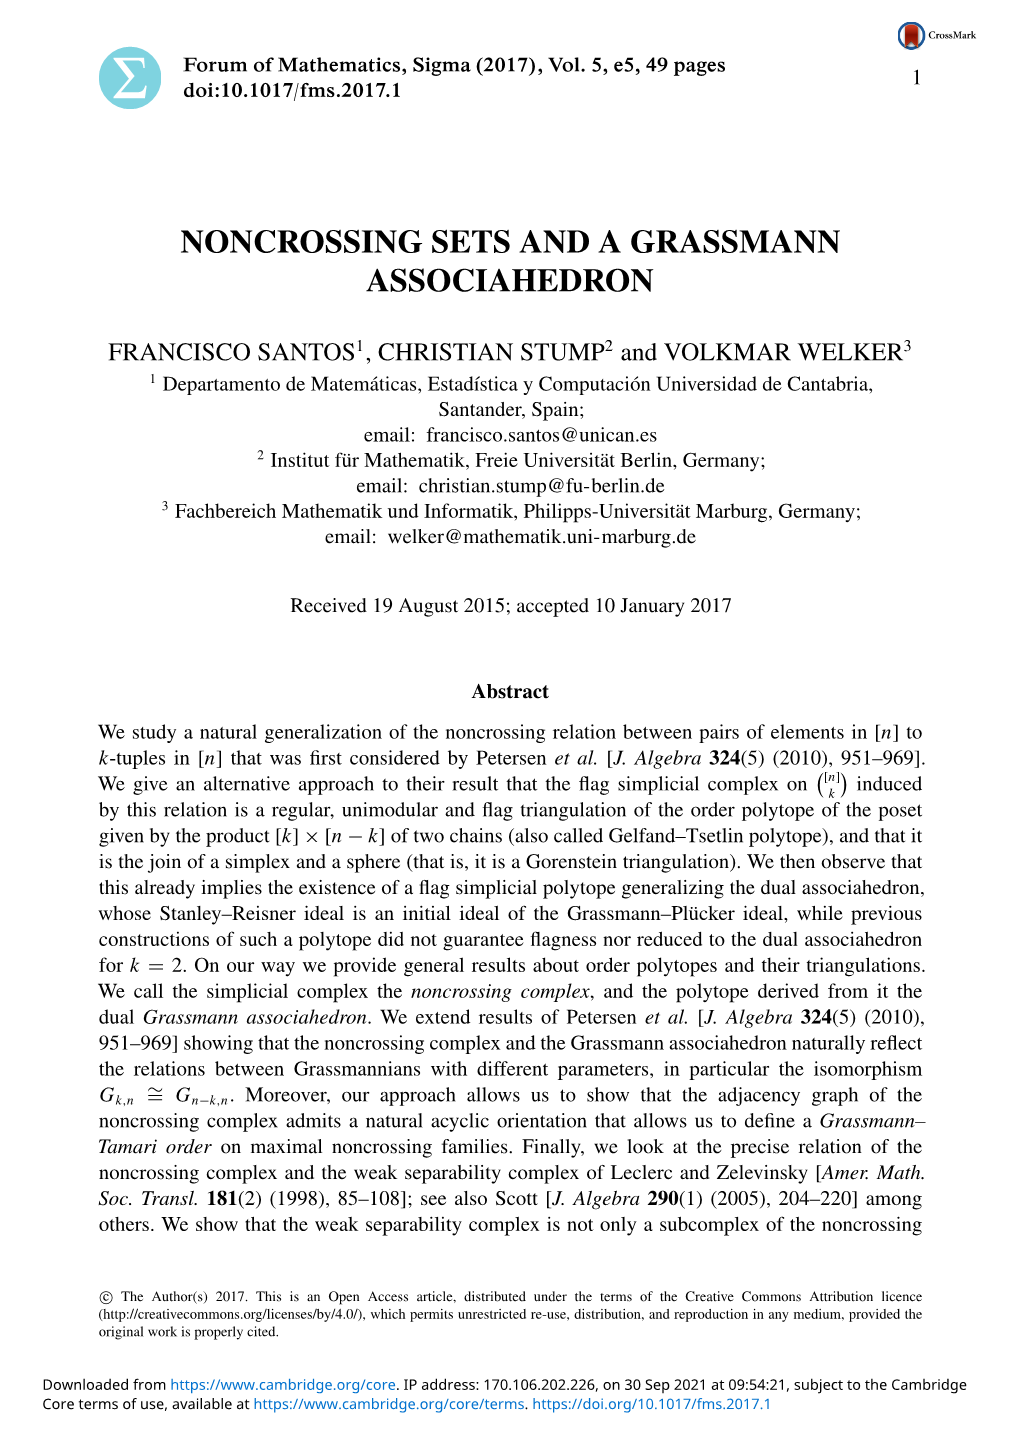 Noncrossing Sets and a Grassmann Associahedron